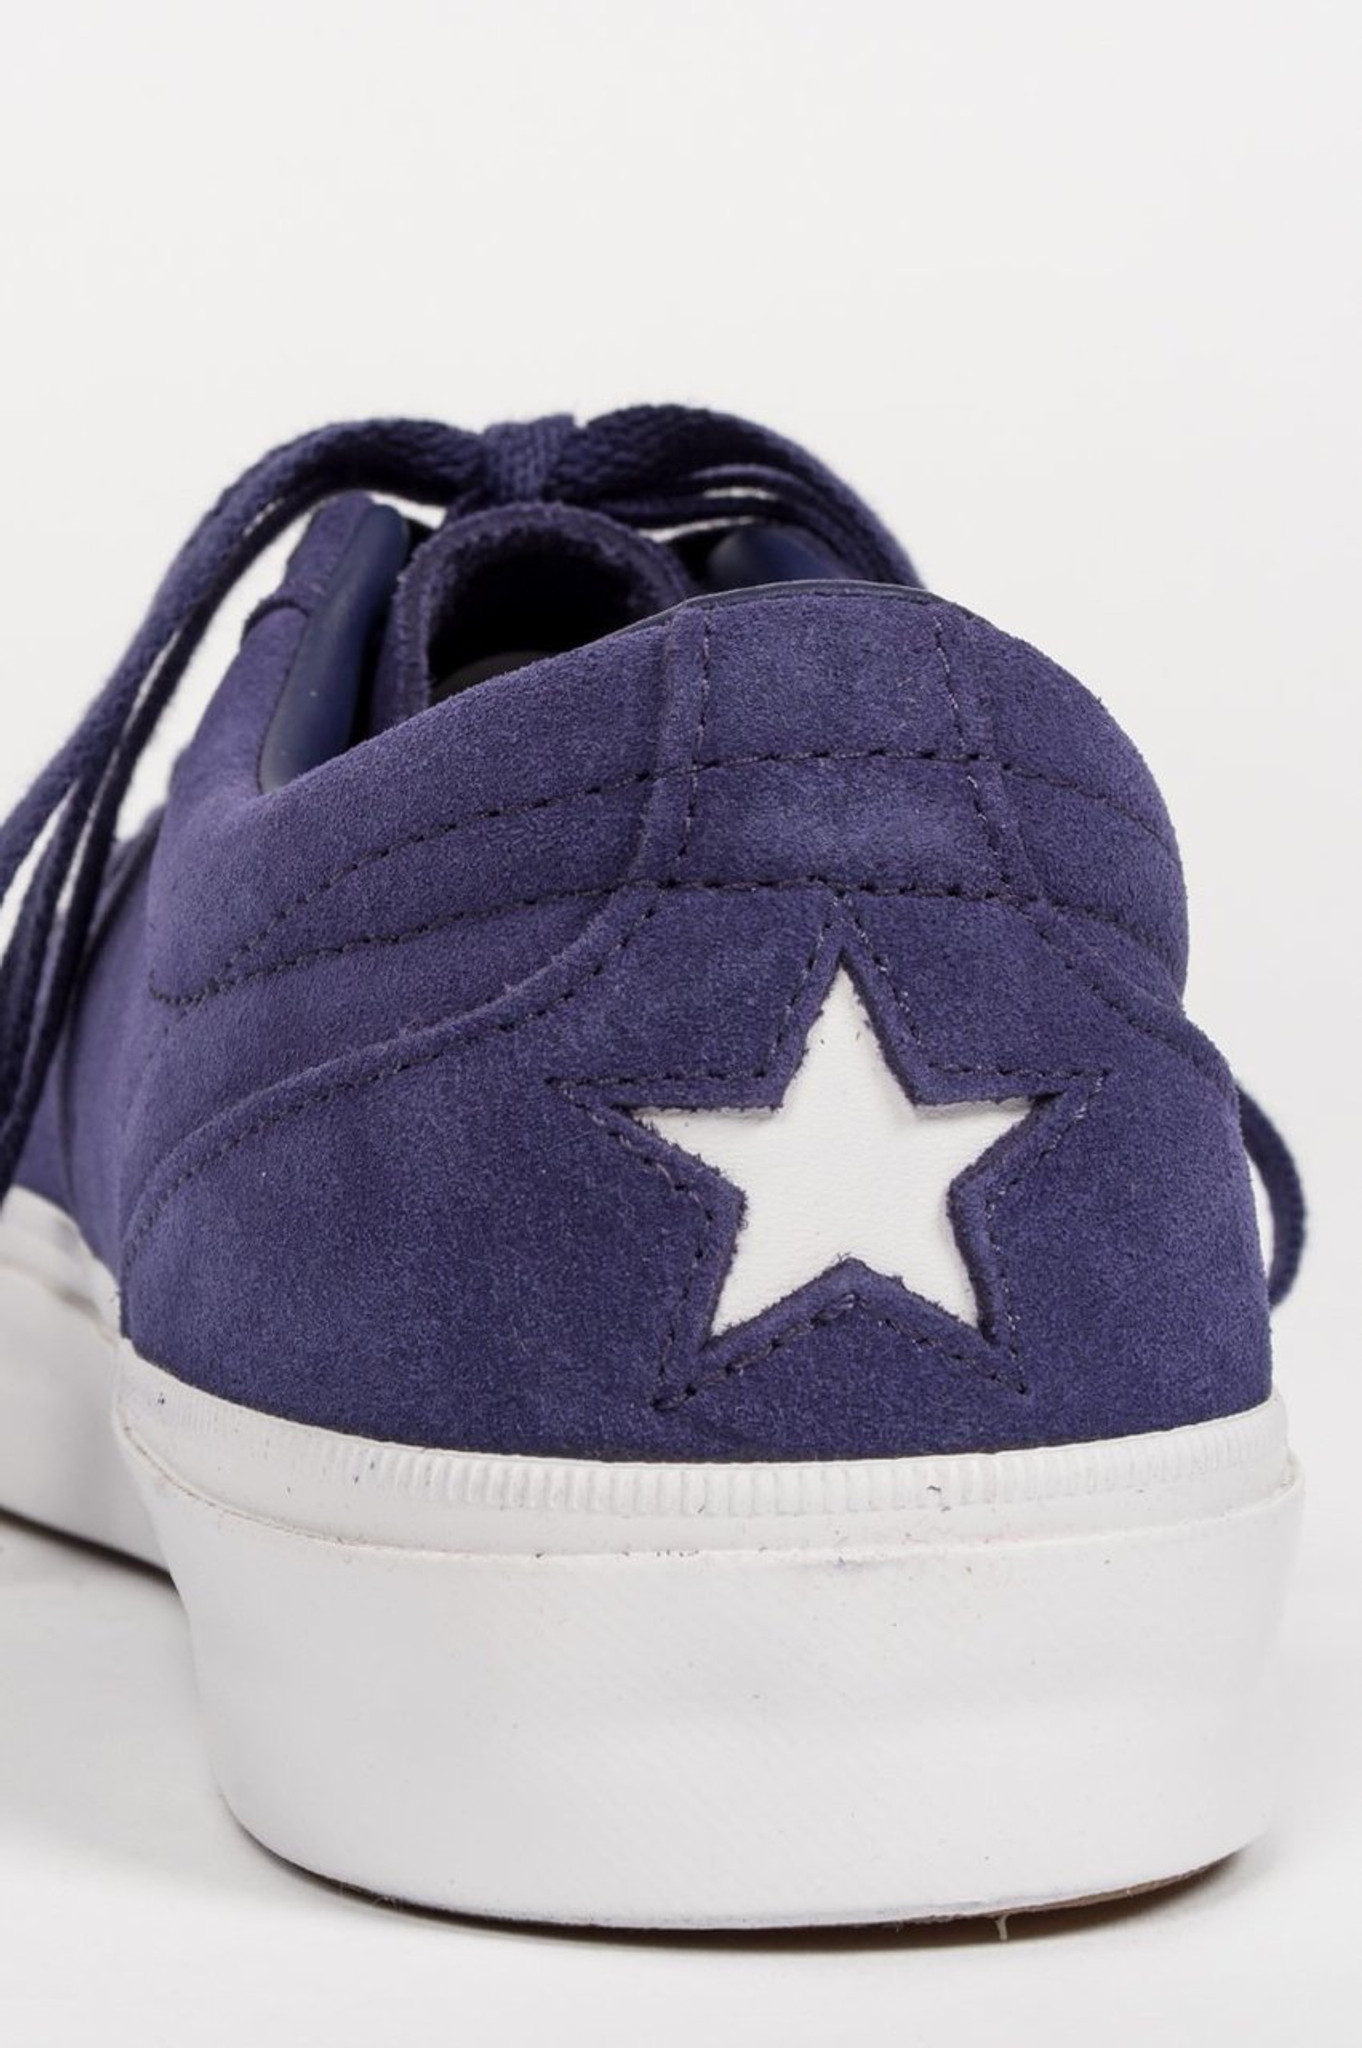 CONVERSE ONE STAR PRO SUEDE LOW TOP JAPANESE EGGPLANT 160547C